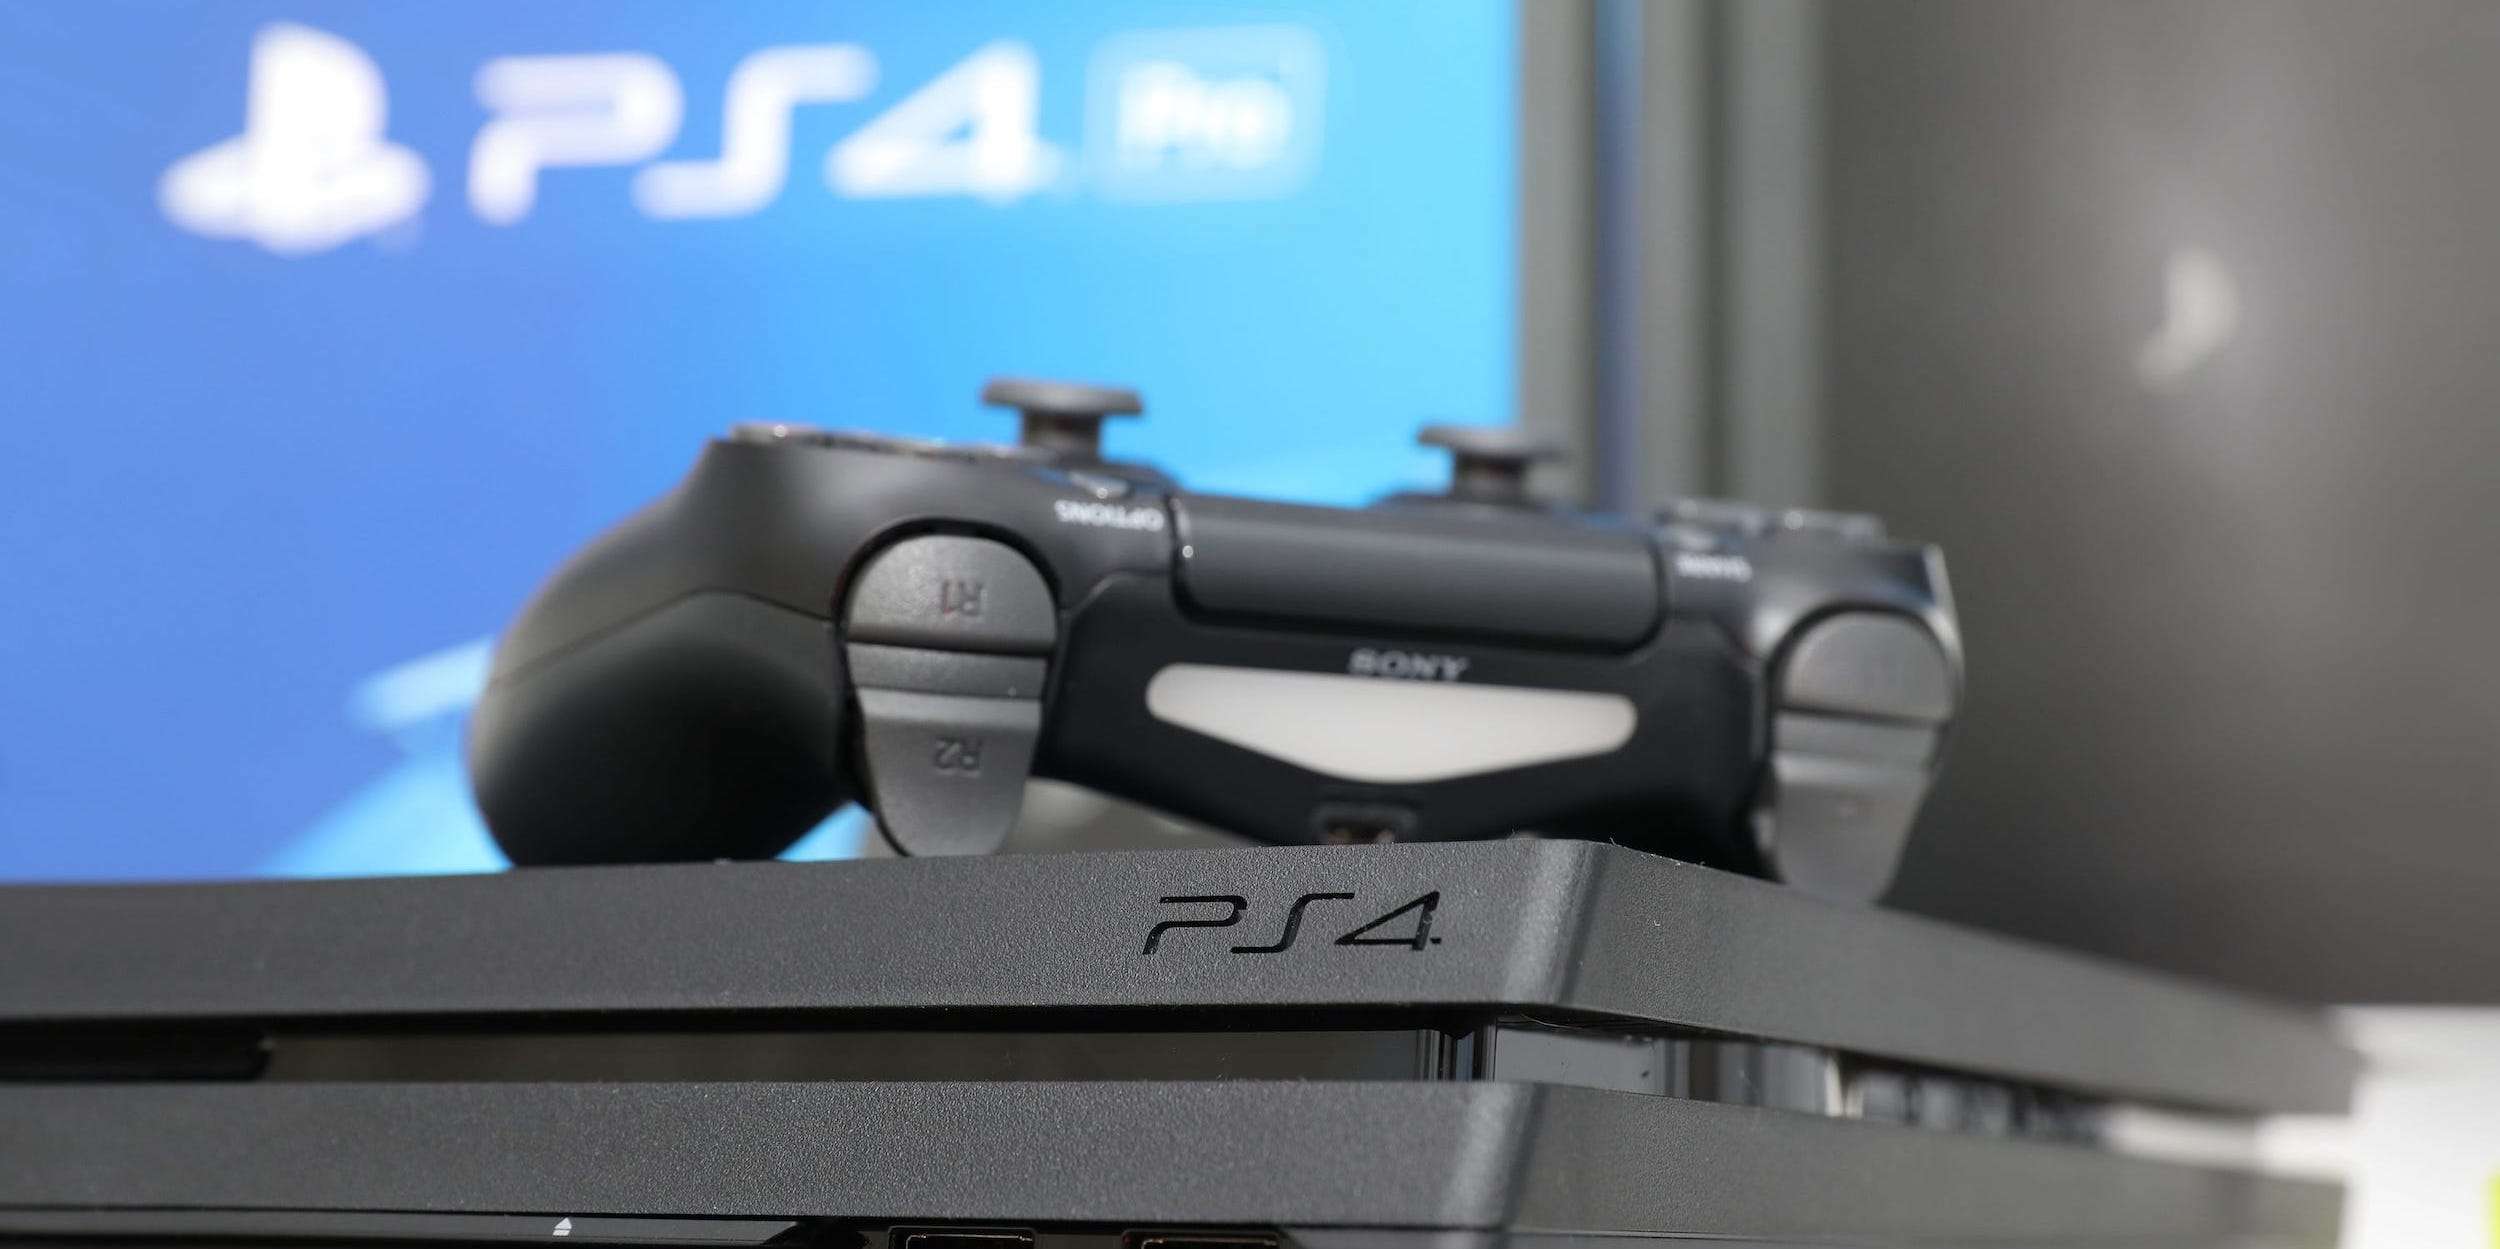 How To Redeem A Gift Card Code On Ps4 In 3 Simple Steps